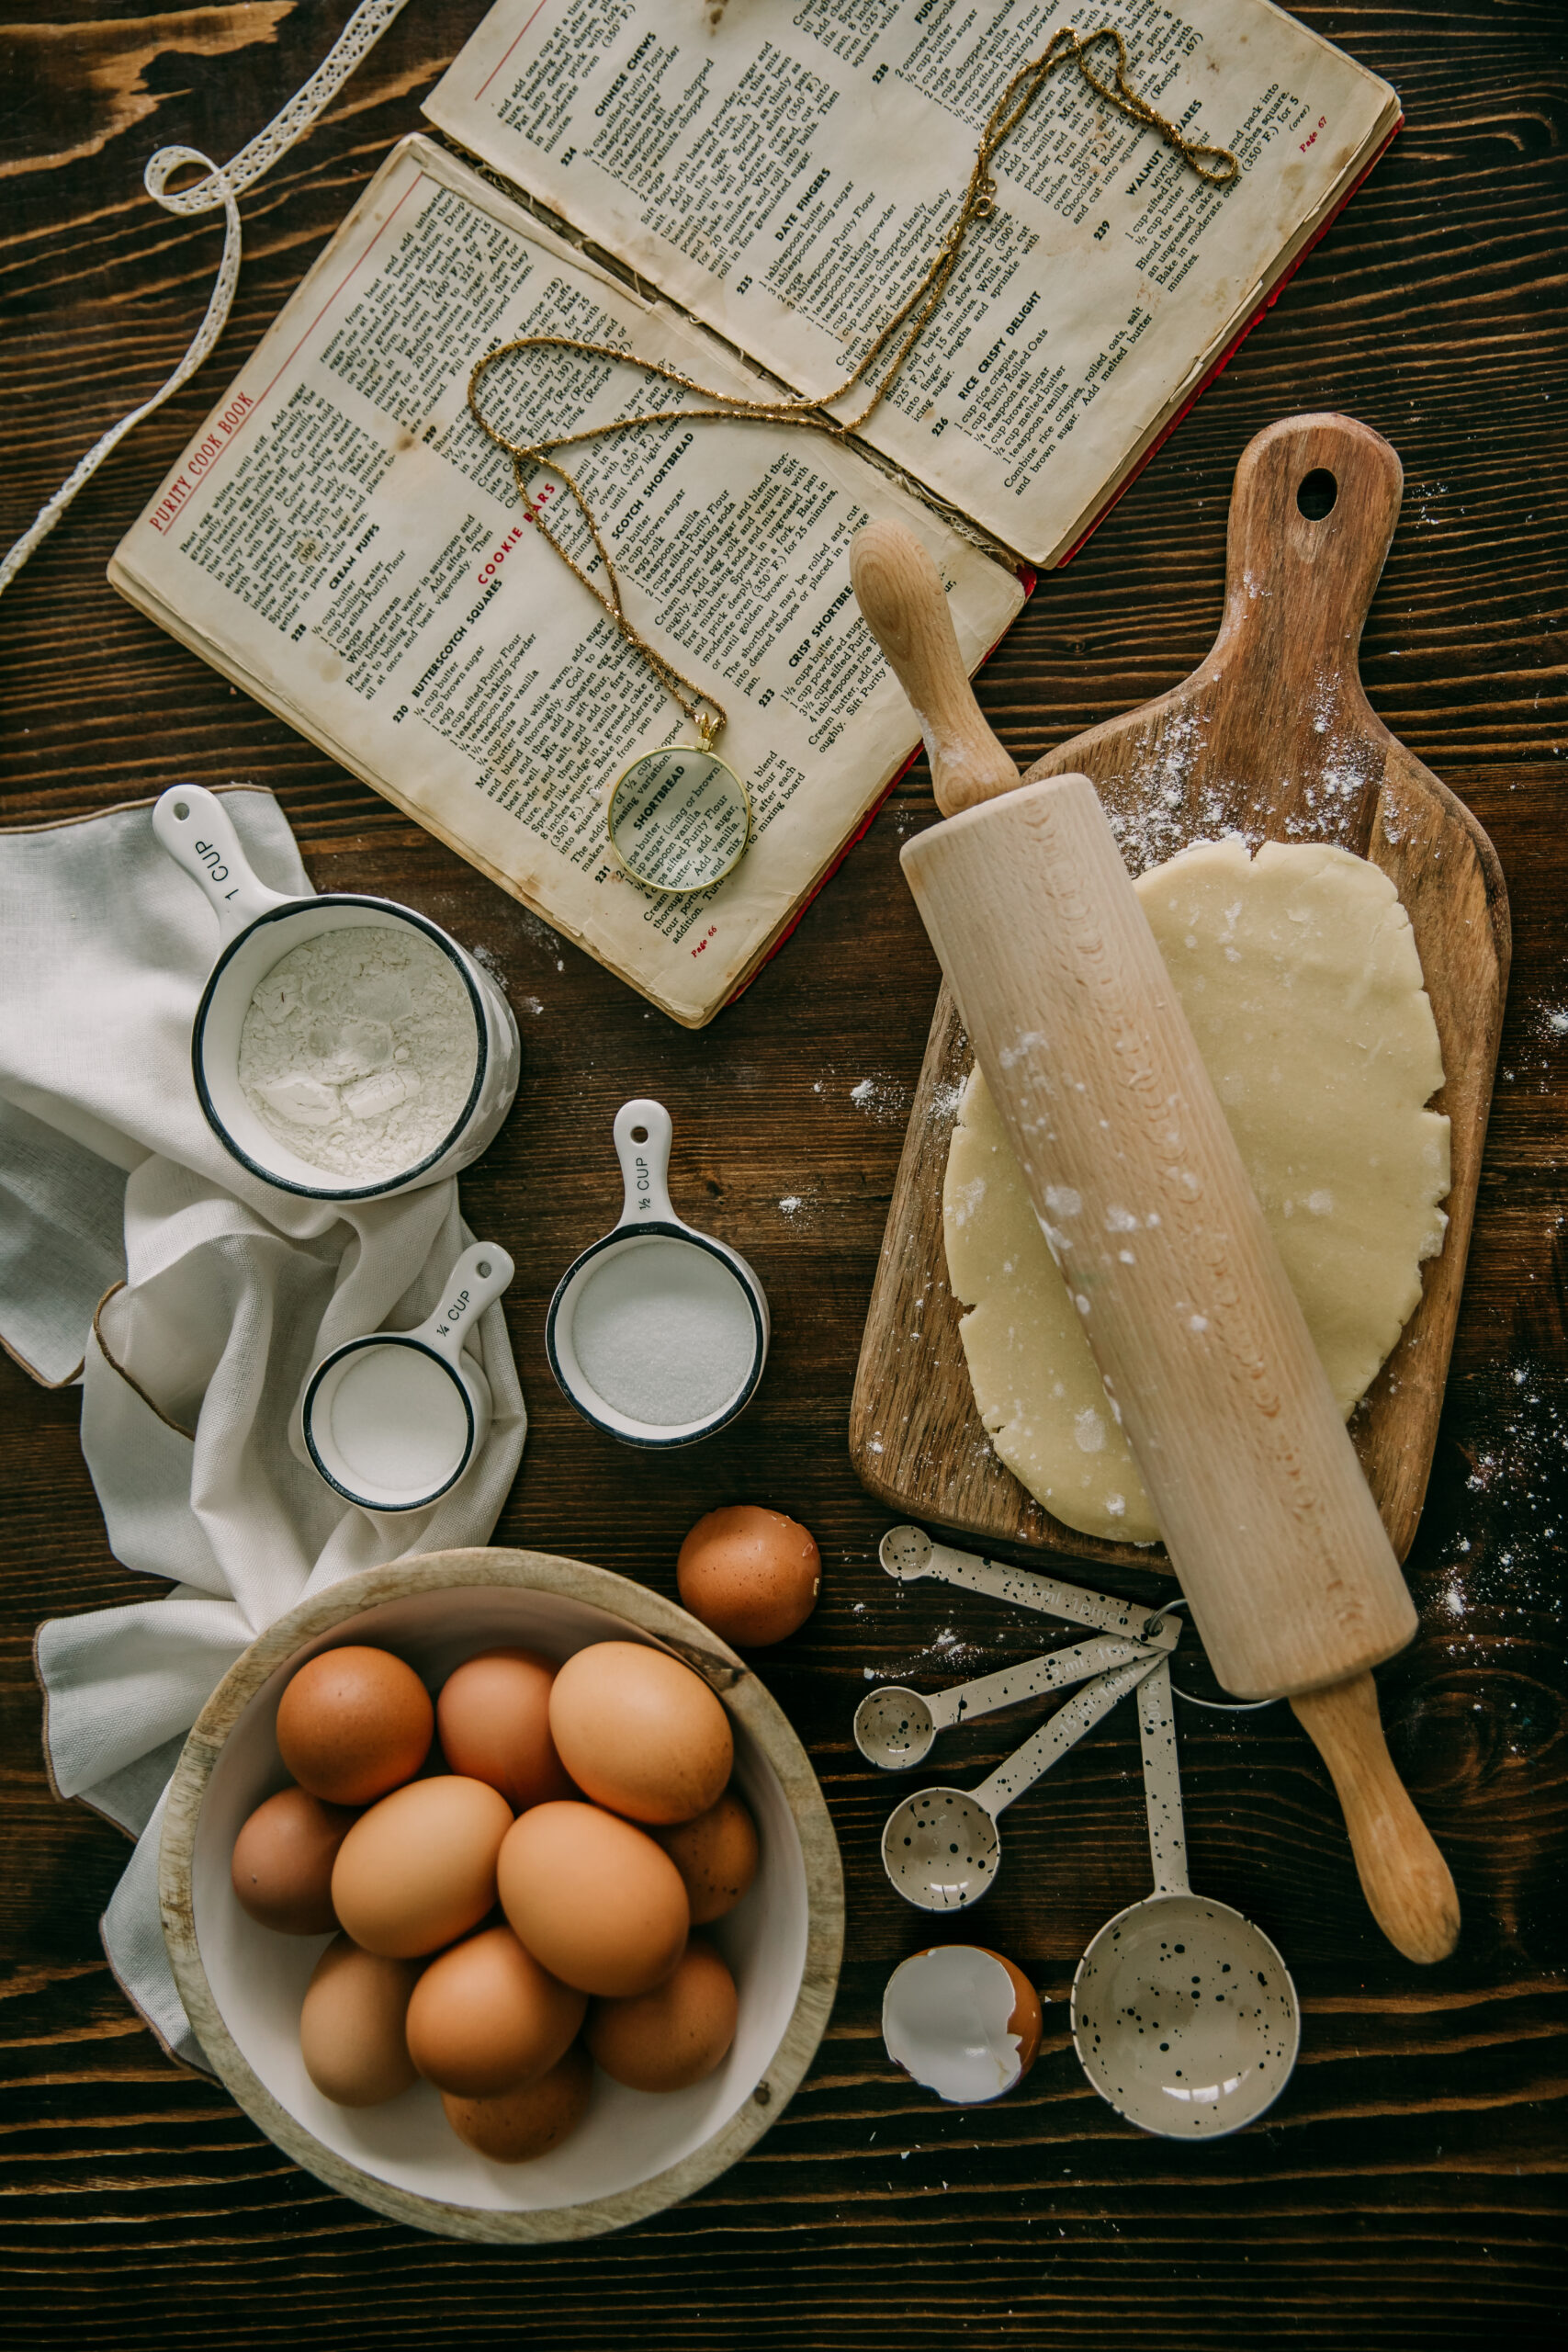 Top view of a wooden table with baking ingredients and tools including a rolling pin, dough, eggs, measuring cups, and an open cookbook with a magnifying glass on it, set in a warm, rustic kitchen.